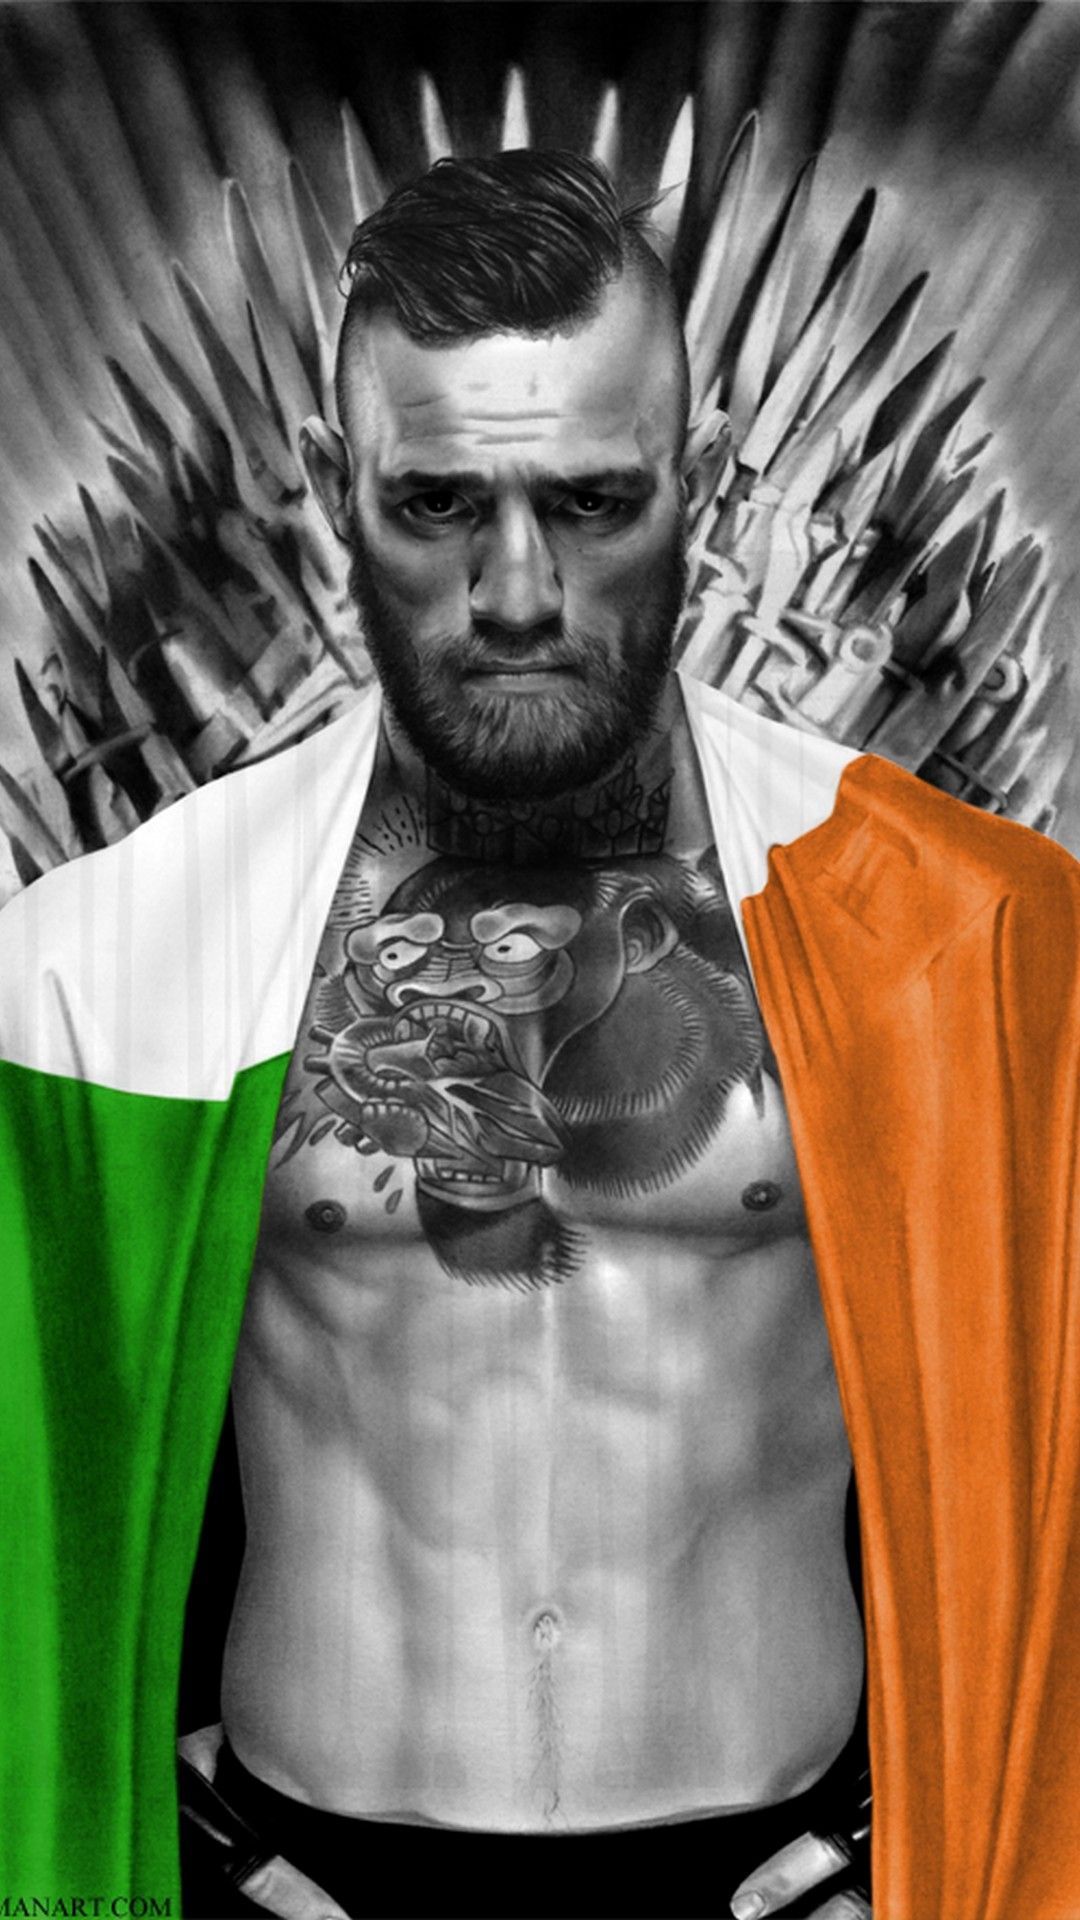 conor mcgregor iphone wallpaper,muscle,chest,t shirt,facial hair,photography